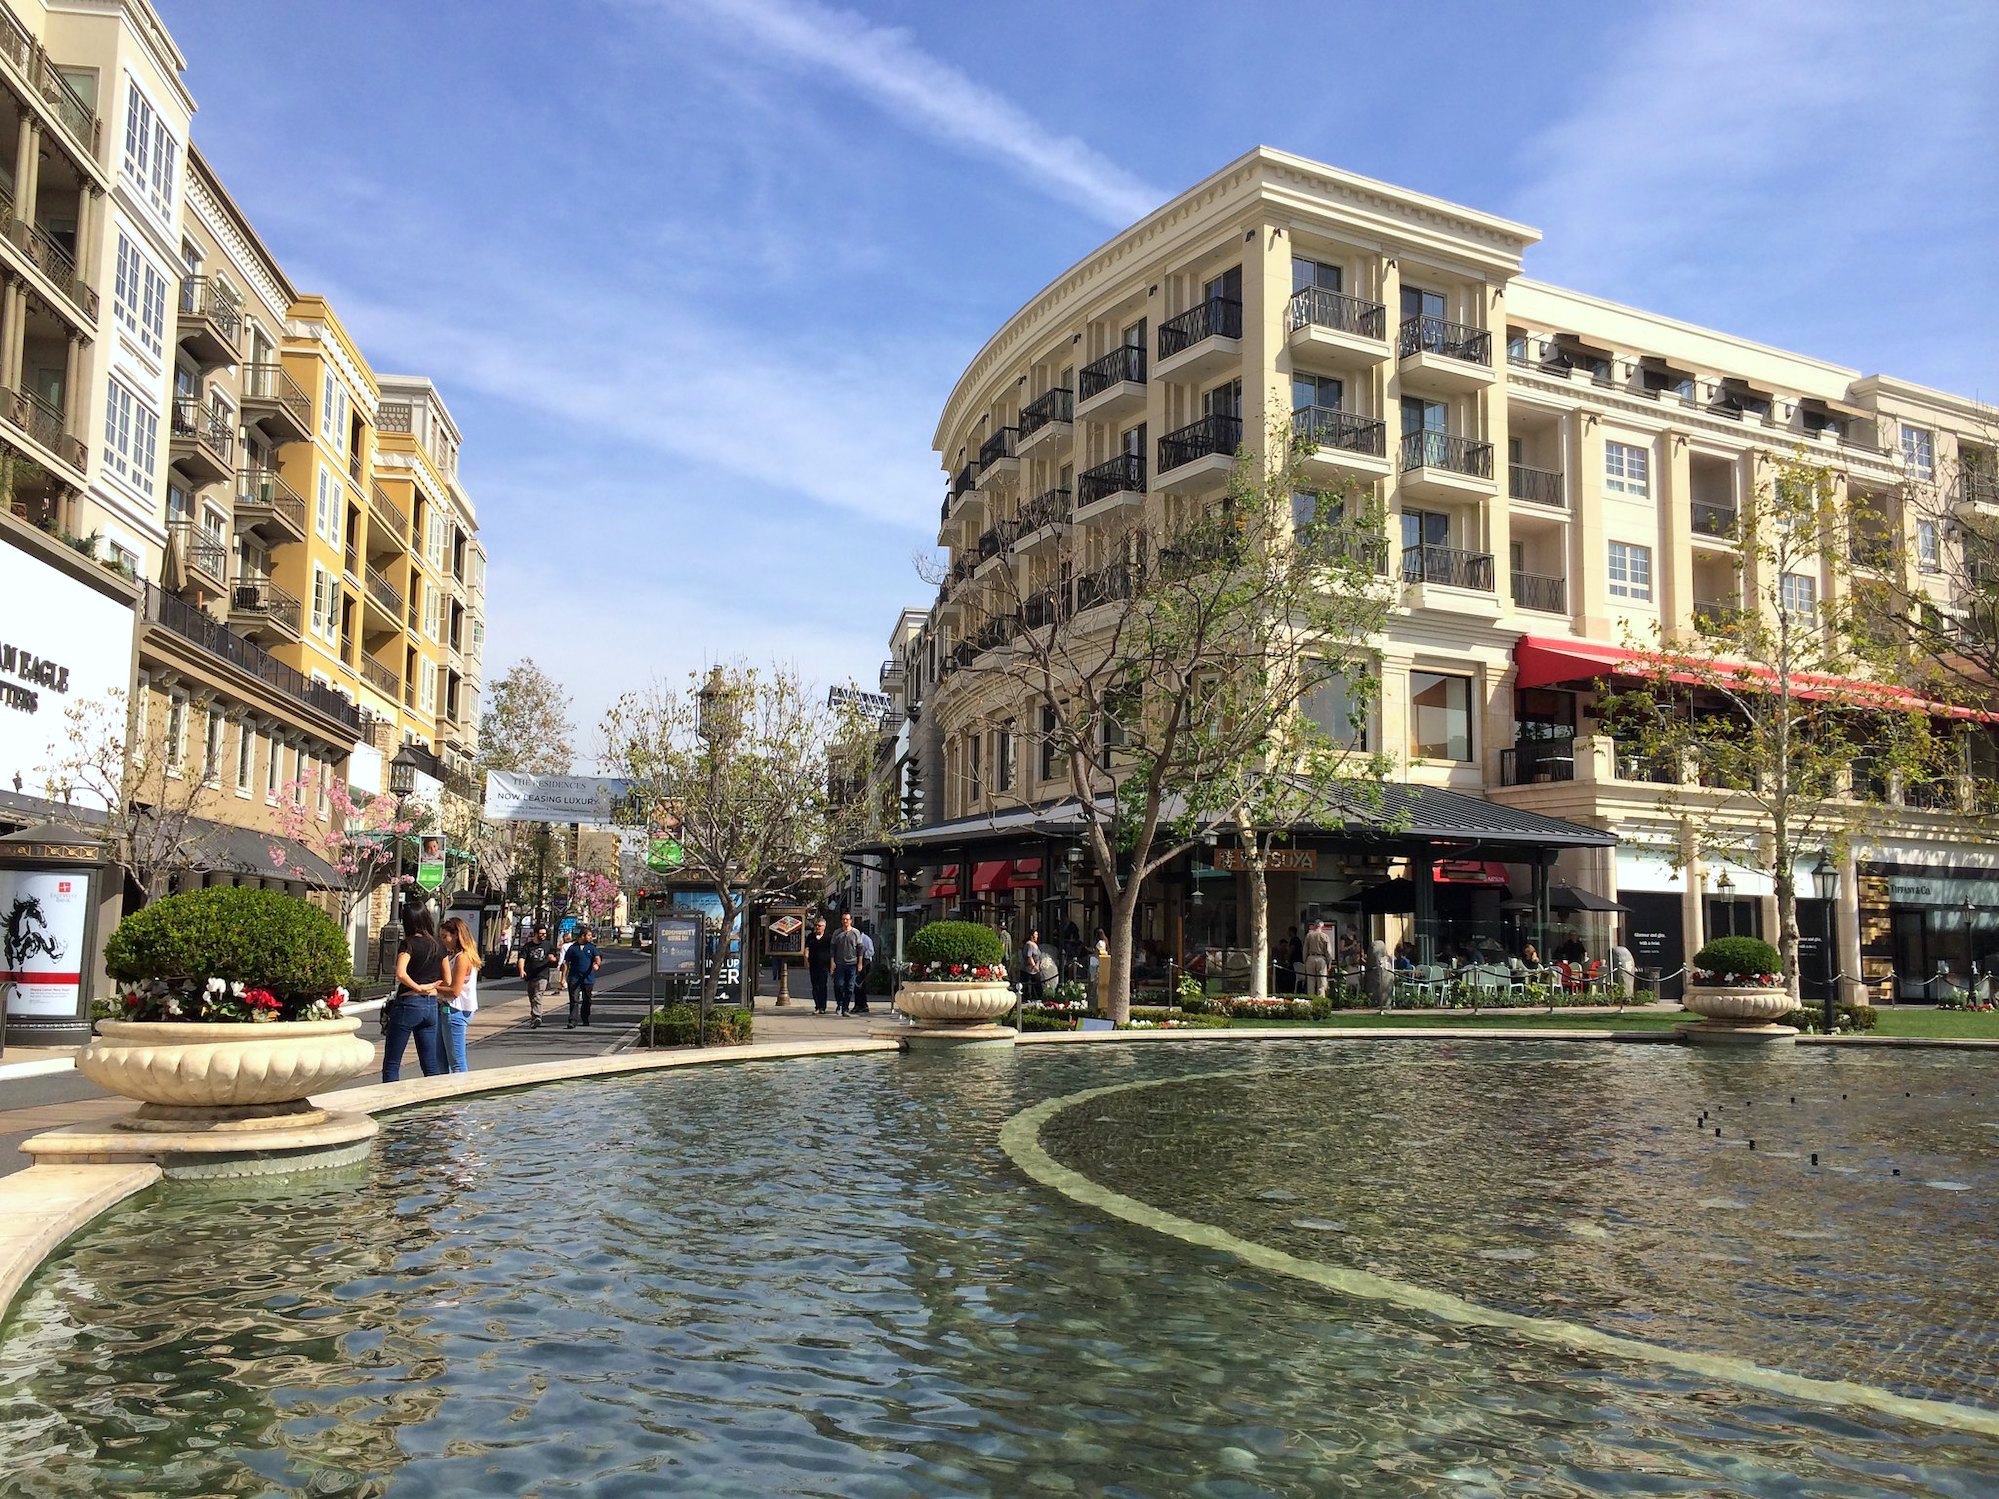 A large fountain with shops and dining surrounding it